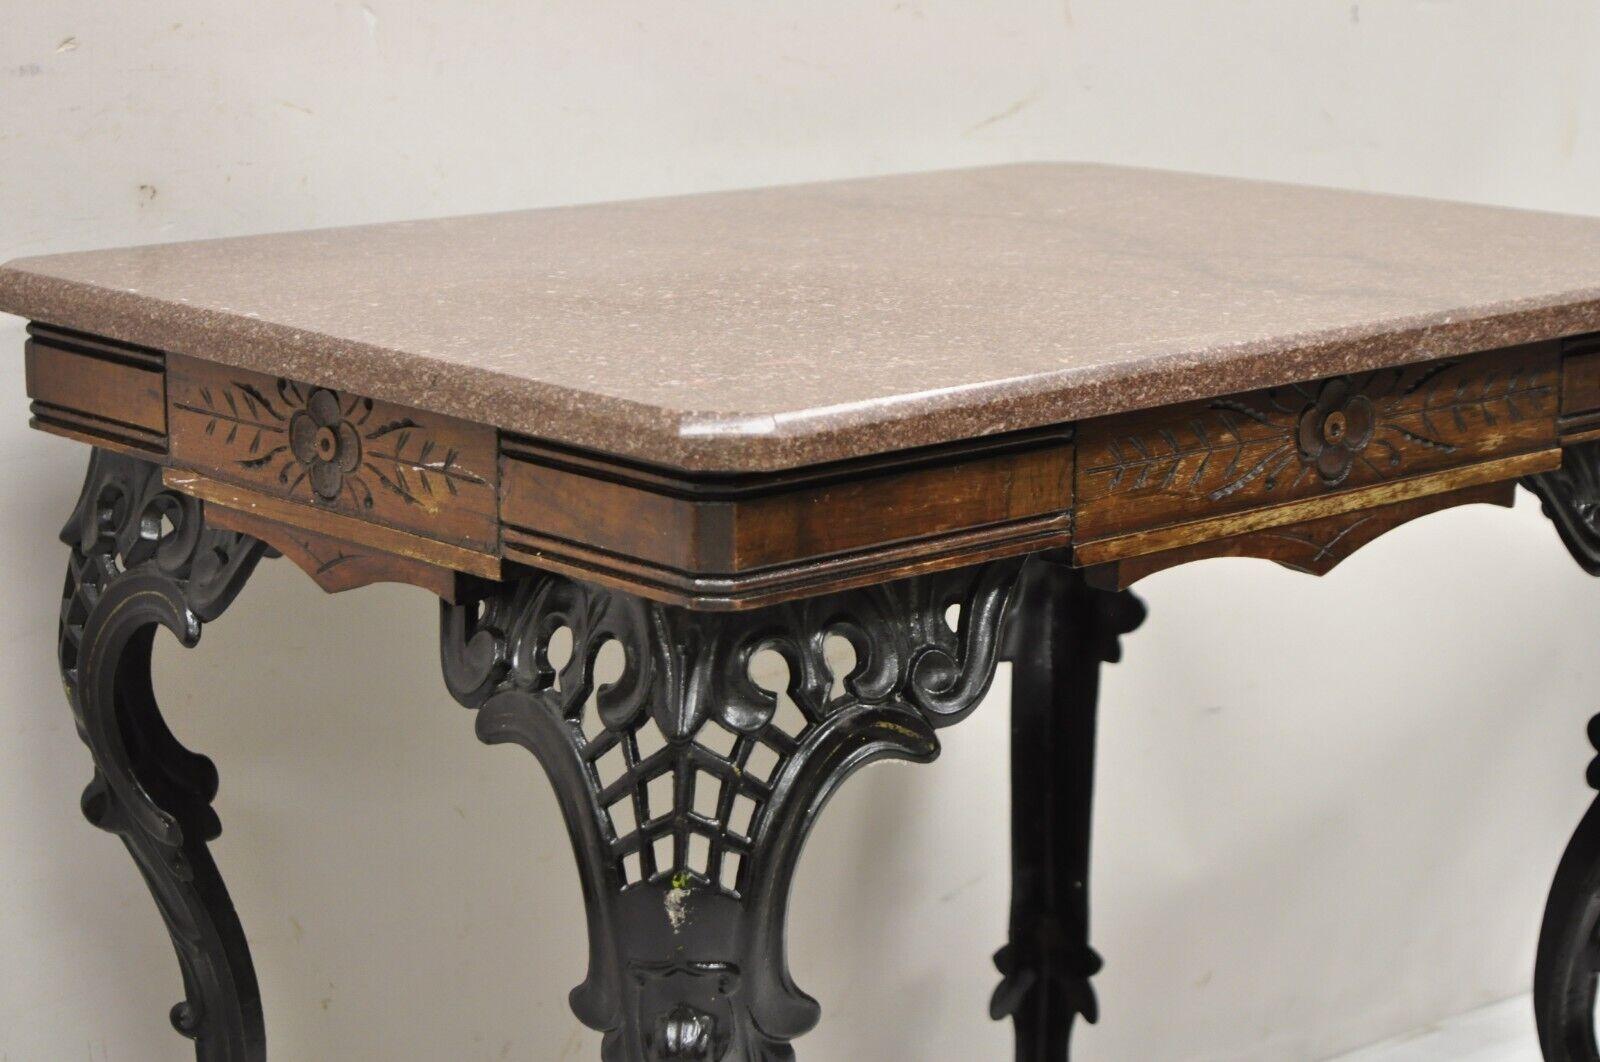 Antique Eastlake Victorian Marble Top Walnut Table with Cast Iron Legs 1